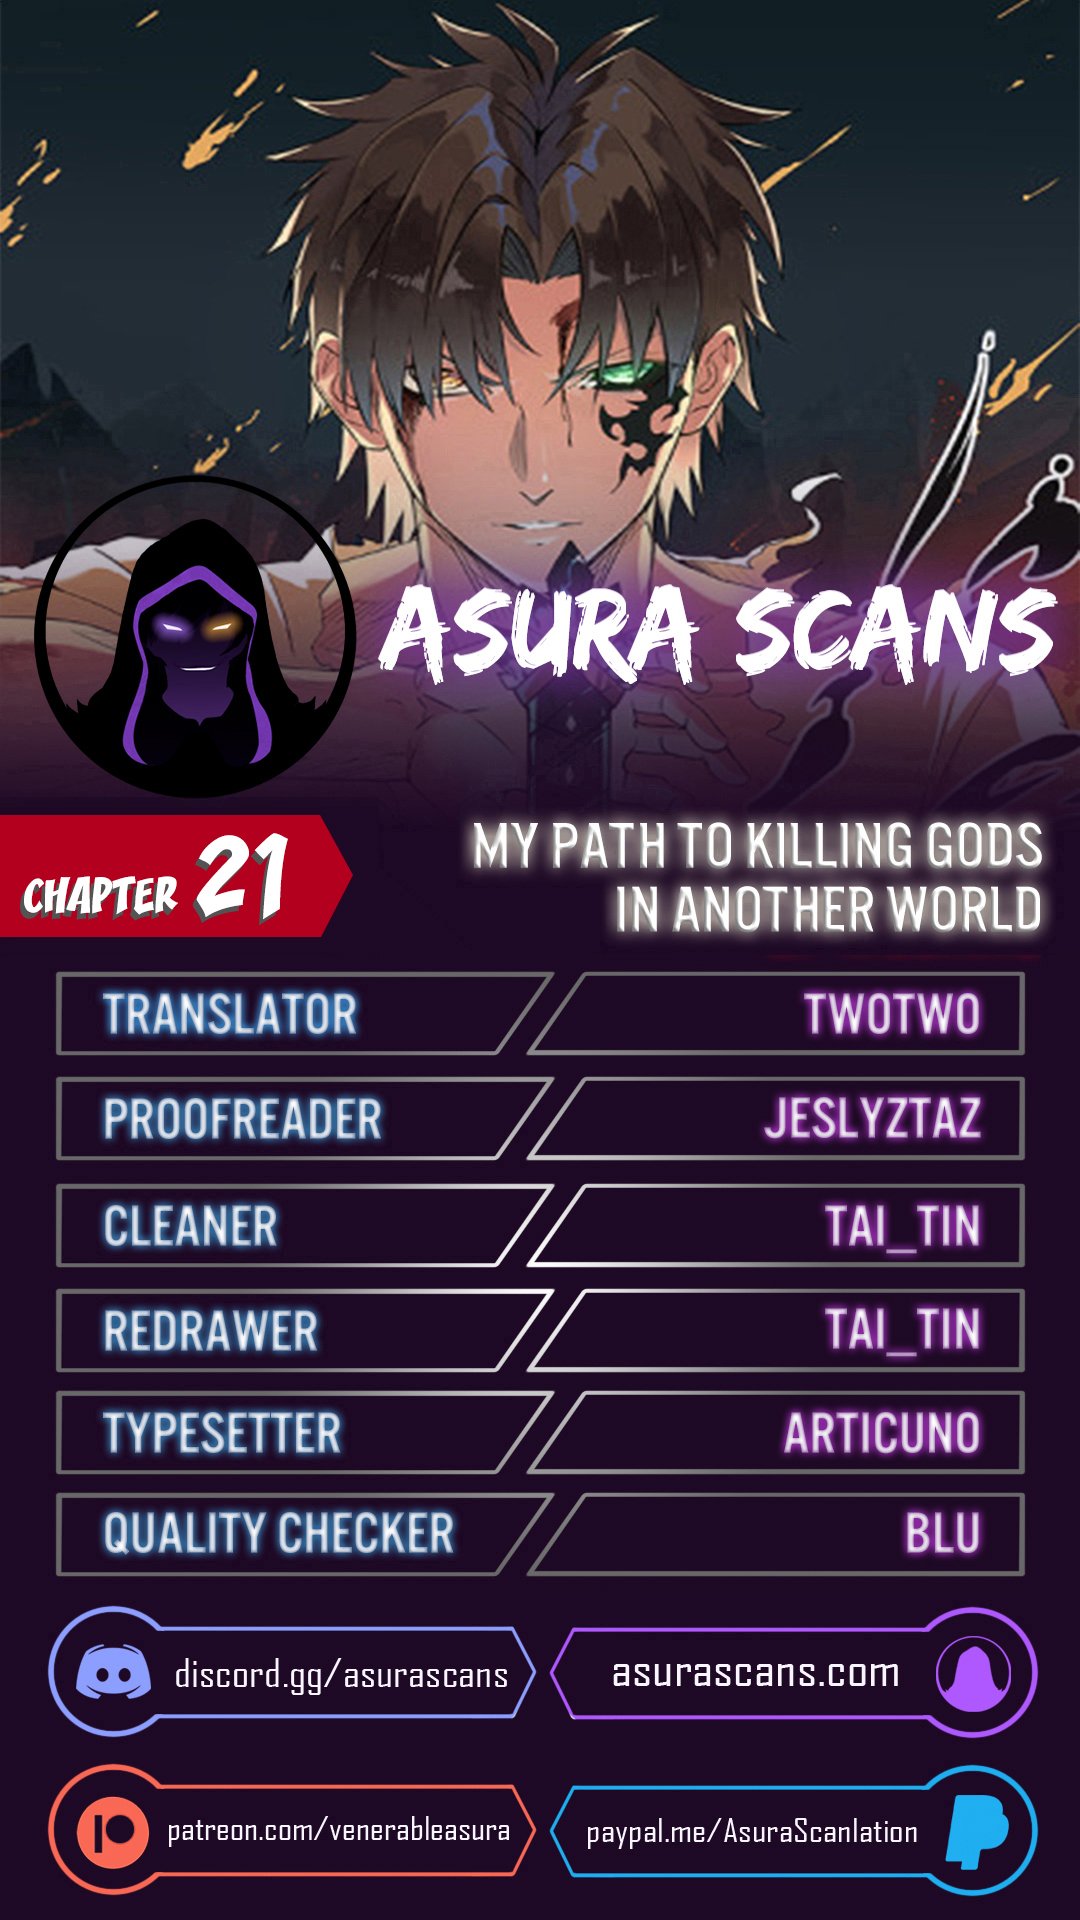 My Path to Killing Gods in Another World - Chapter 23172 - Image 1